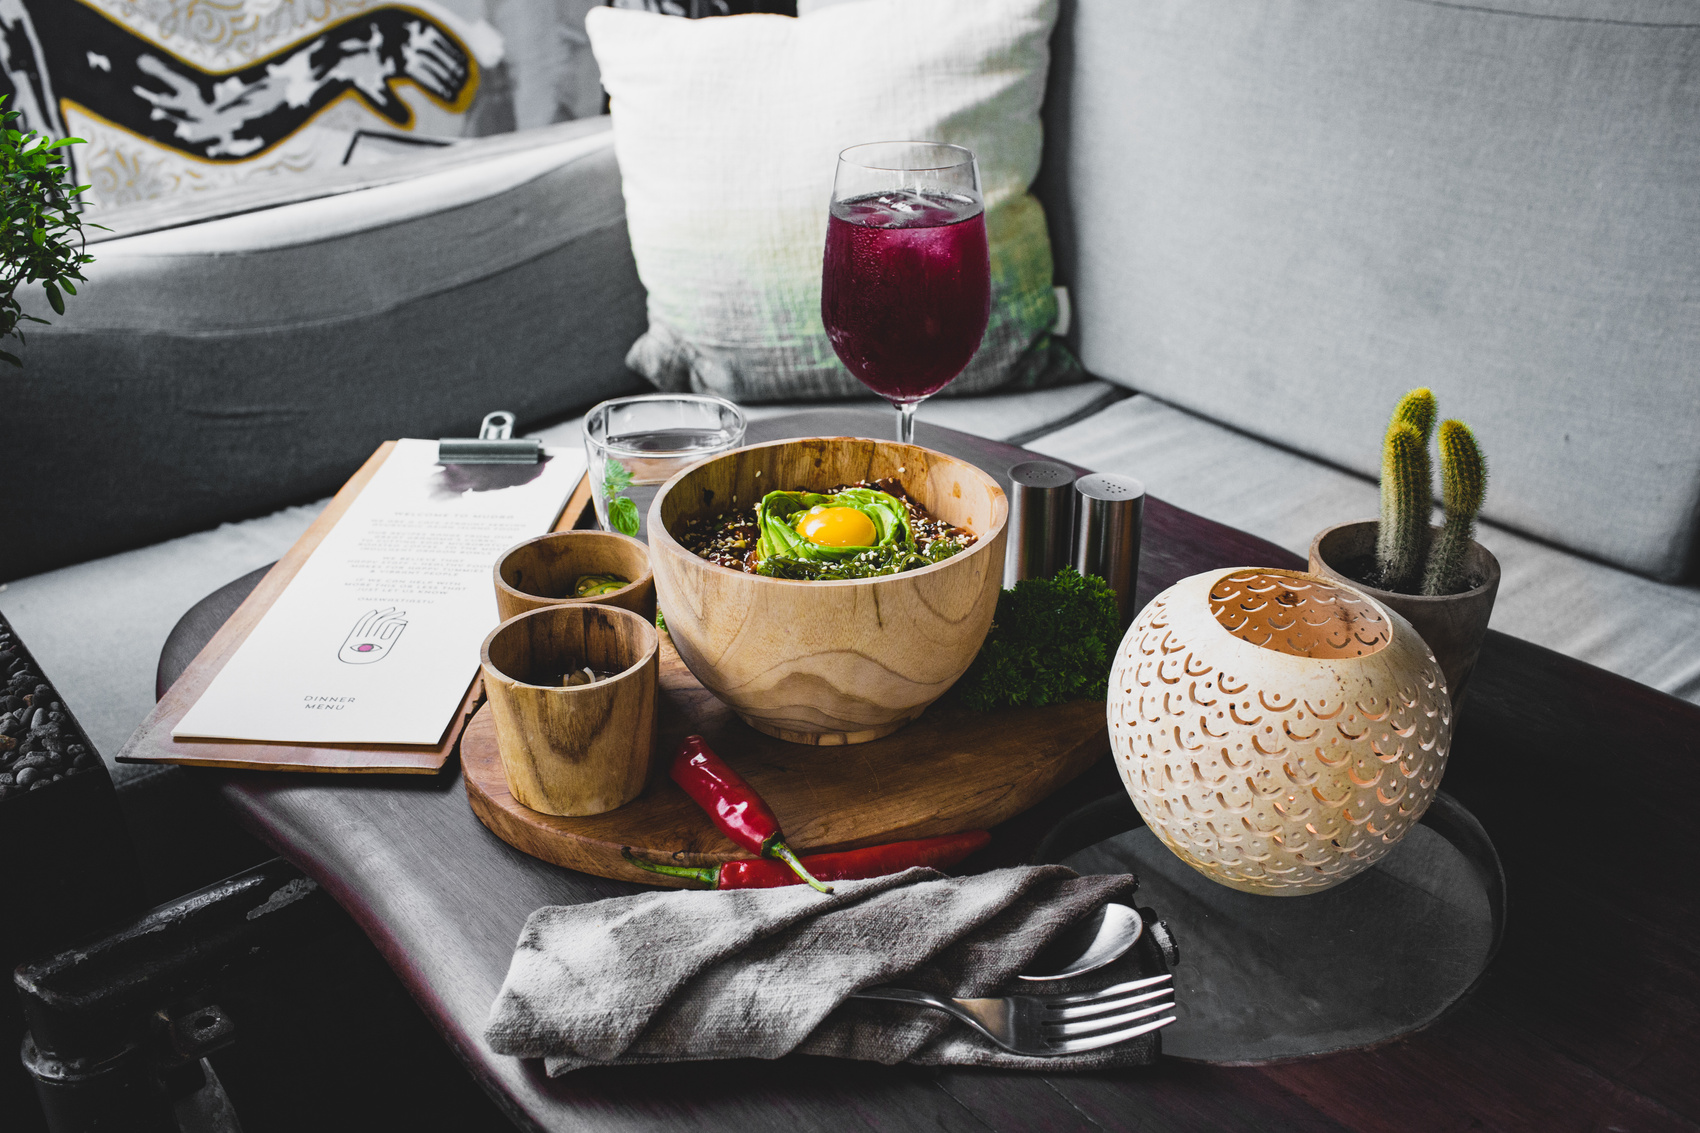 Serving of oriental food in wooden dishes with drinks on table of modern cafe